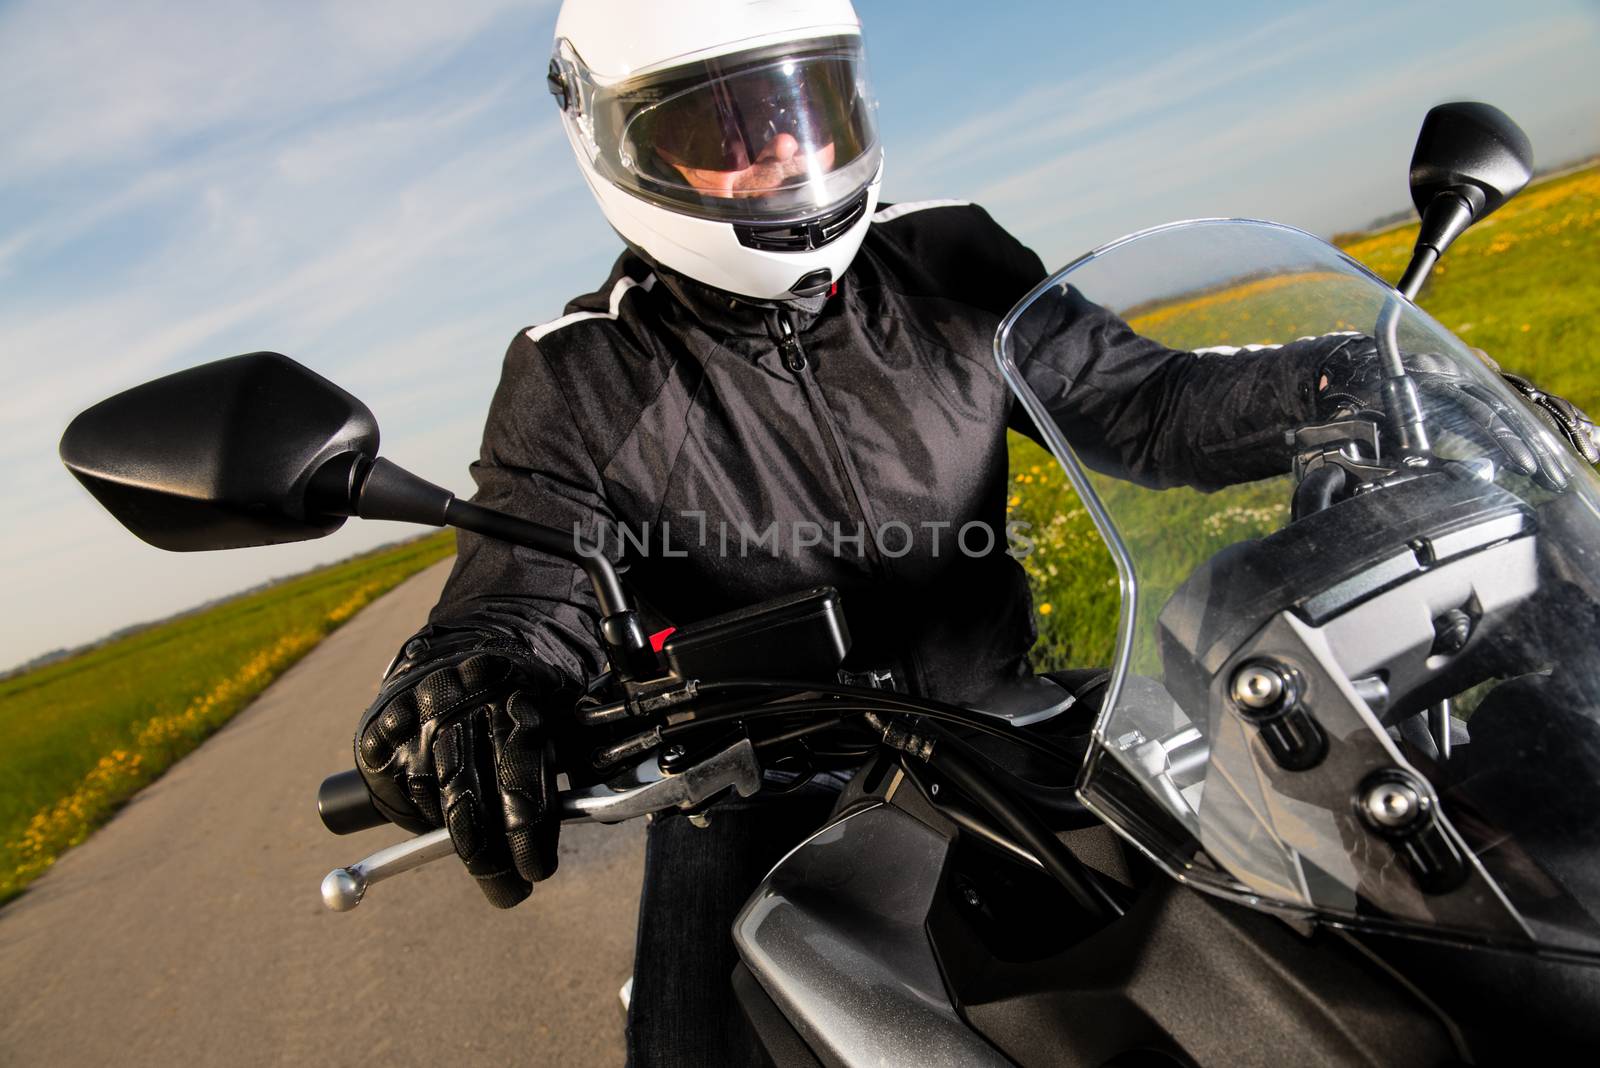 Biker in helmet and leather jacket riding on the road.